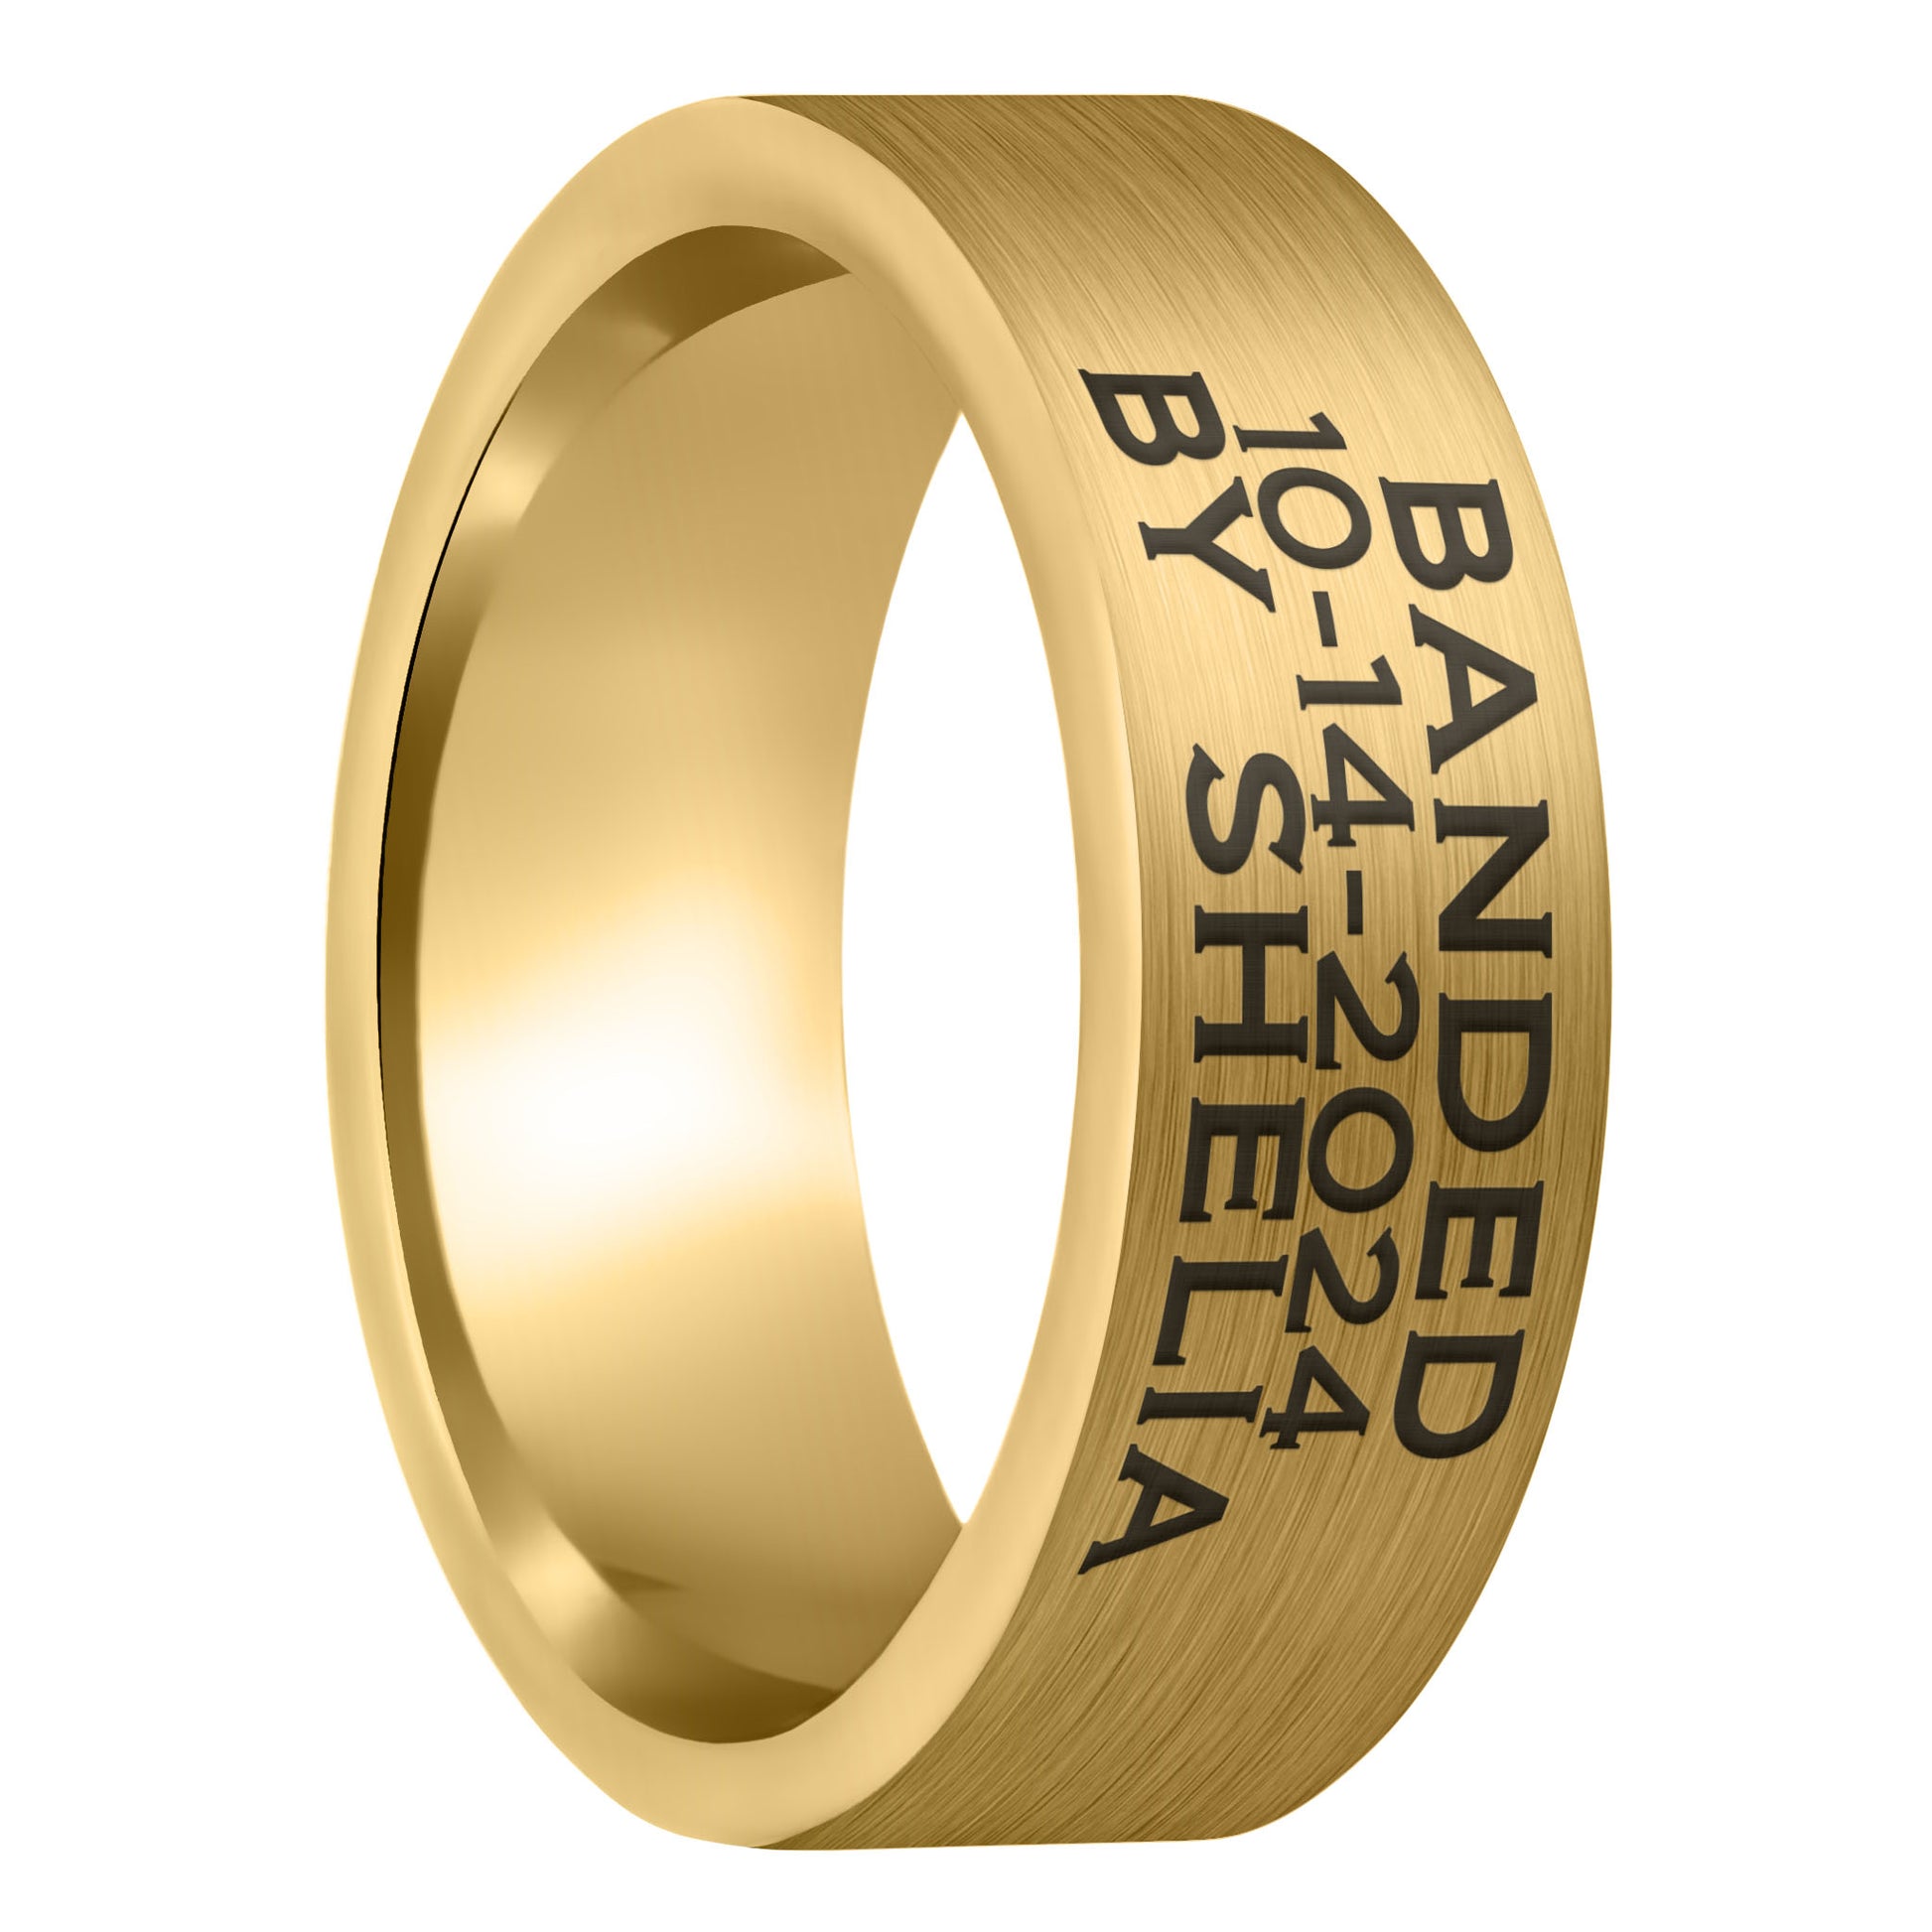 A duck band custom engraved brushed gold tungsten men's wedding band displayed on a plain white background.